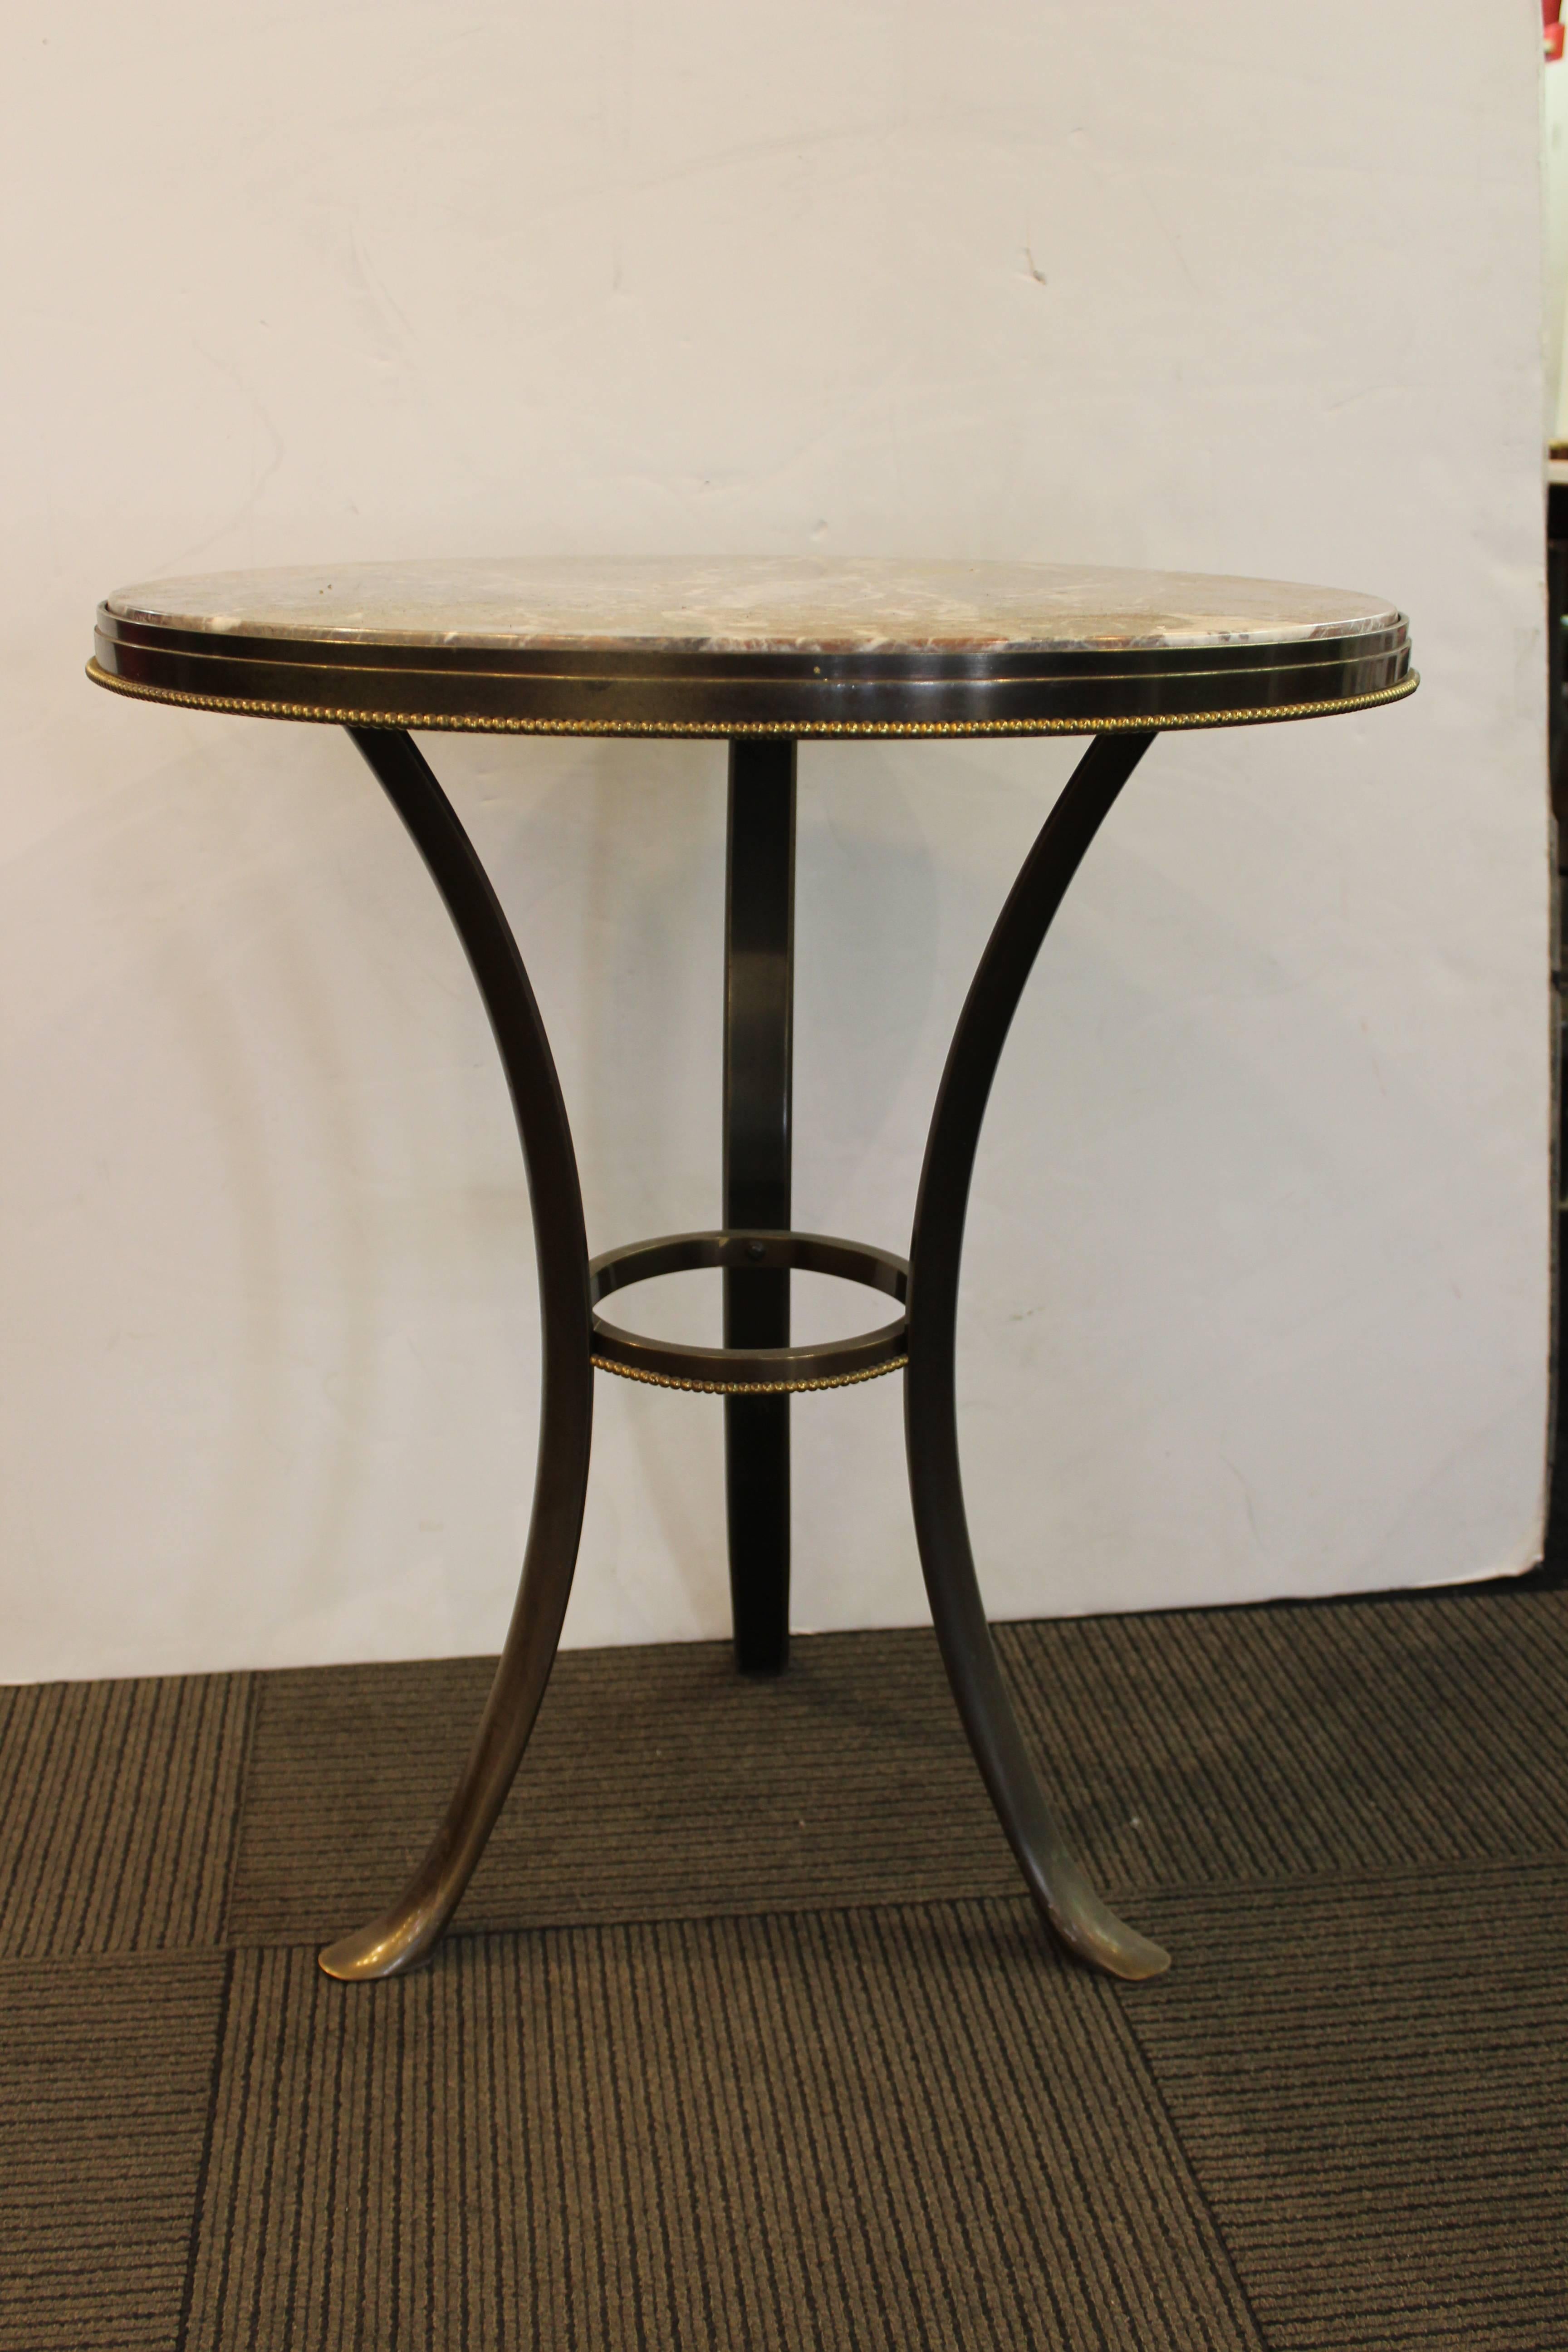 French Midcentury Gueridon Tables in Patinated Bronze with Marble Top